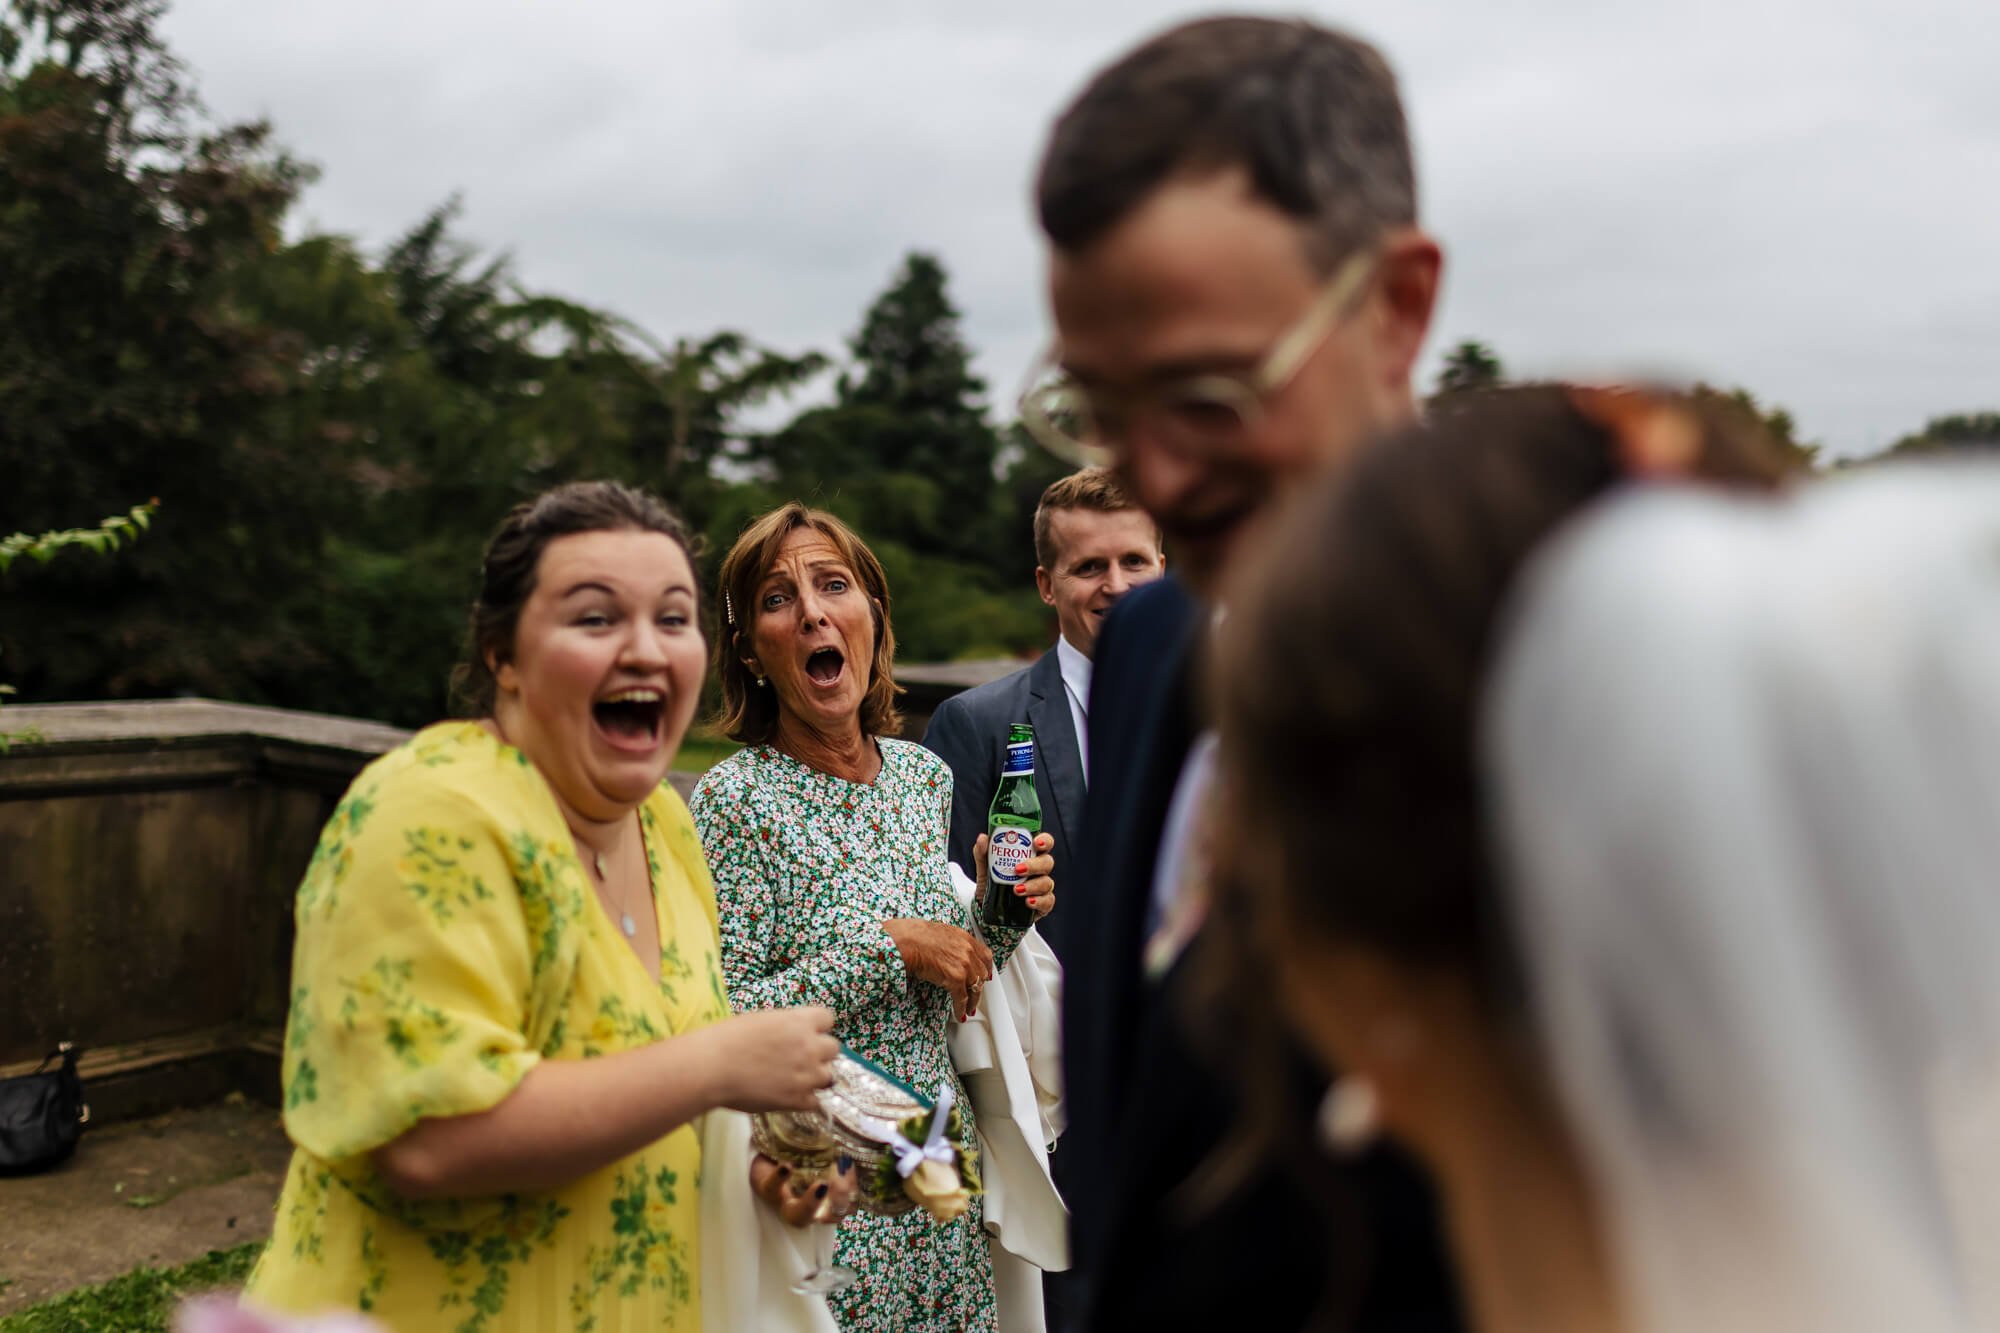 Guests laughing during the reception at a wedding